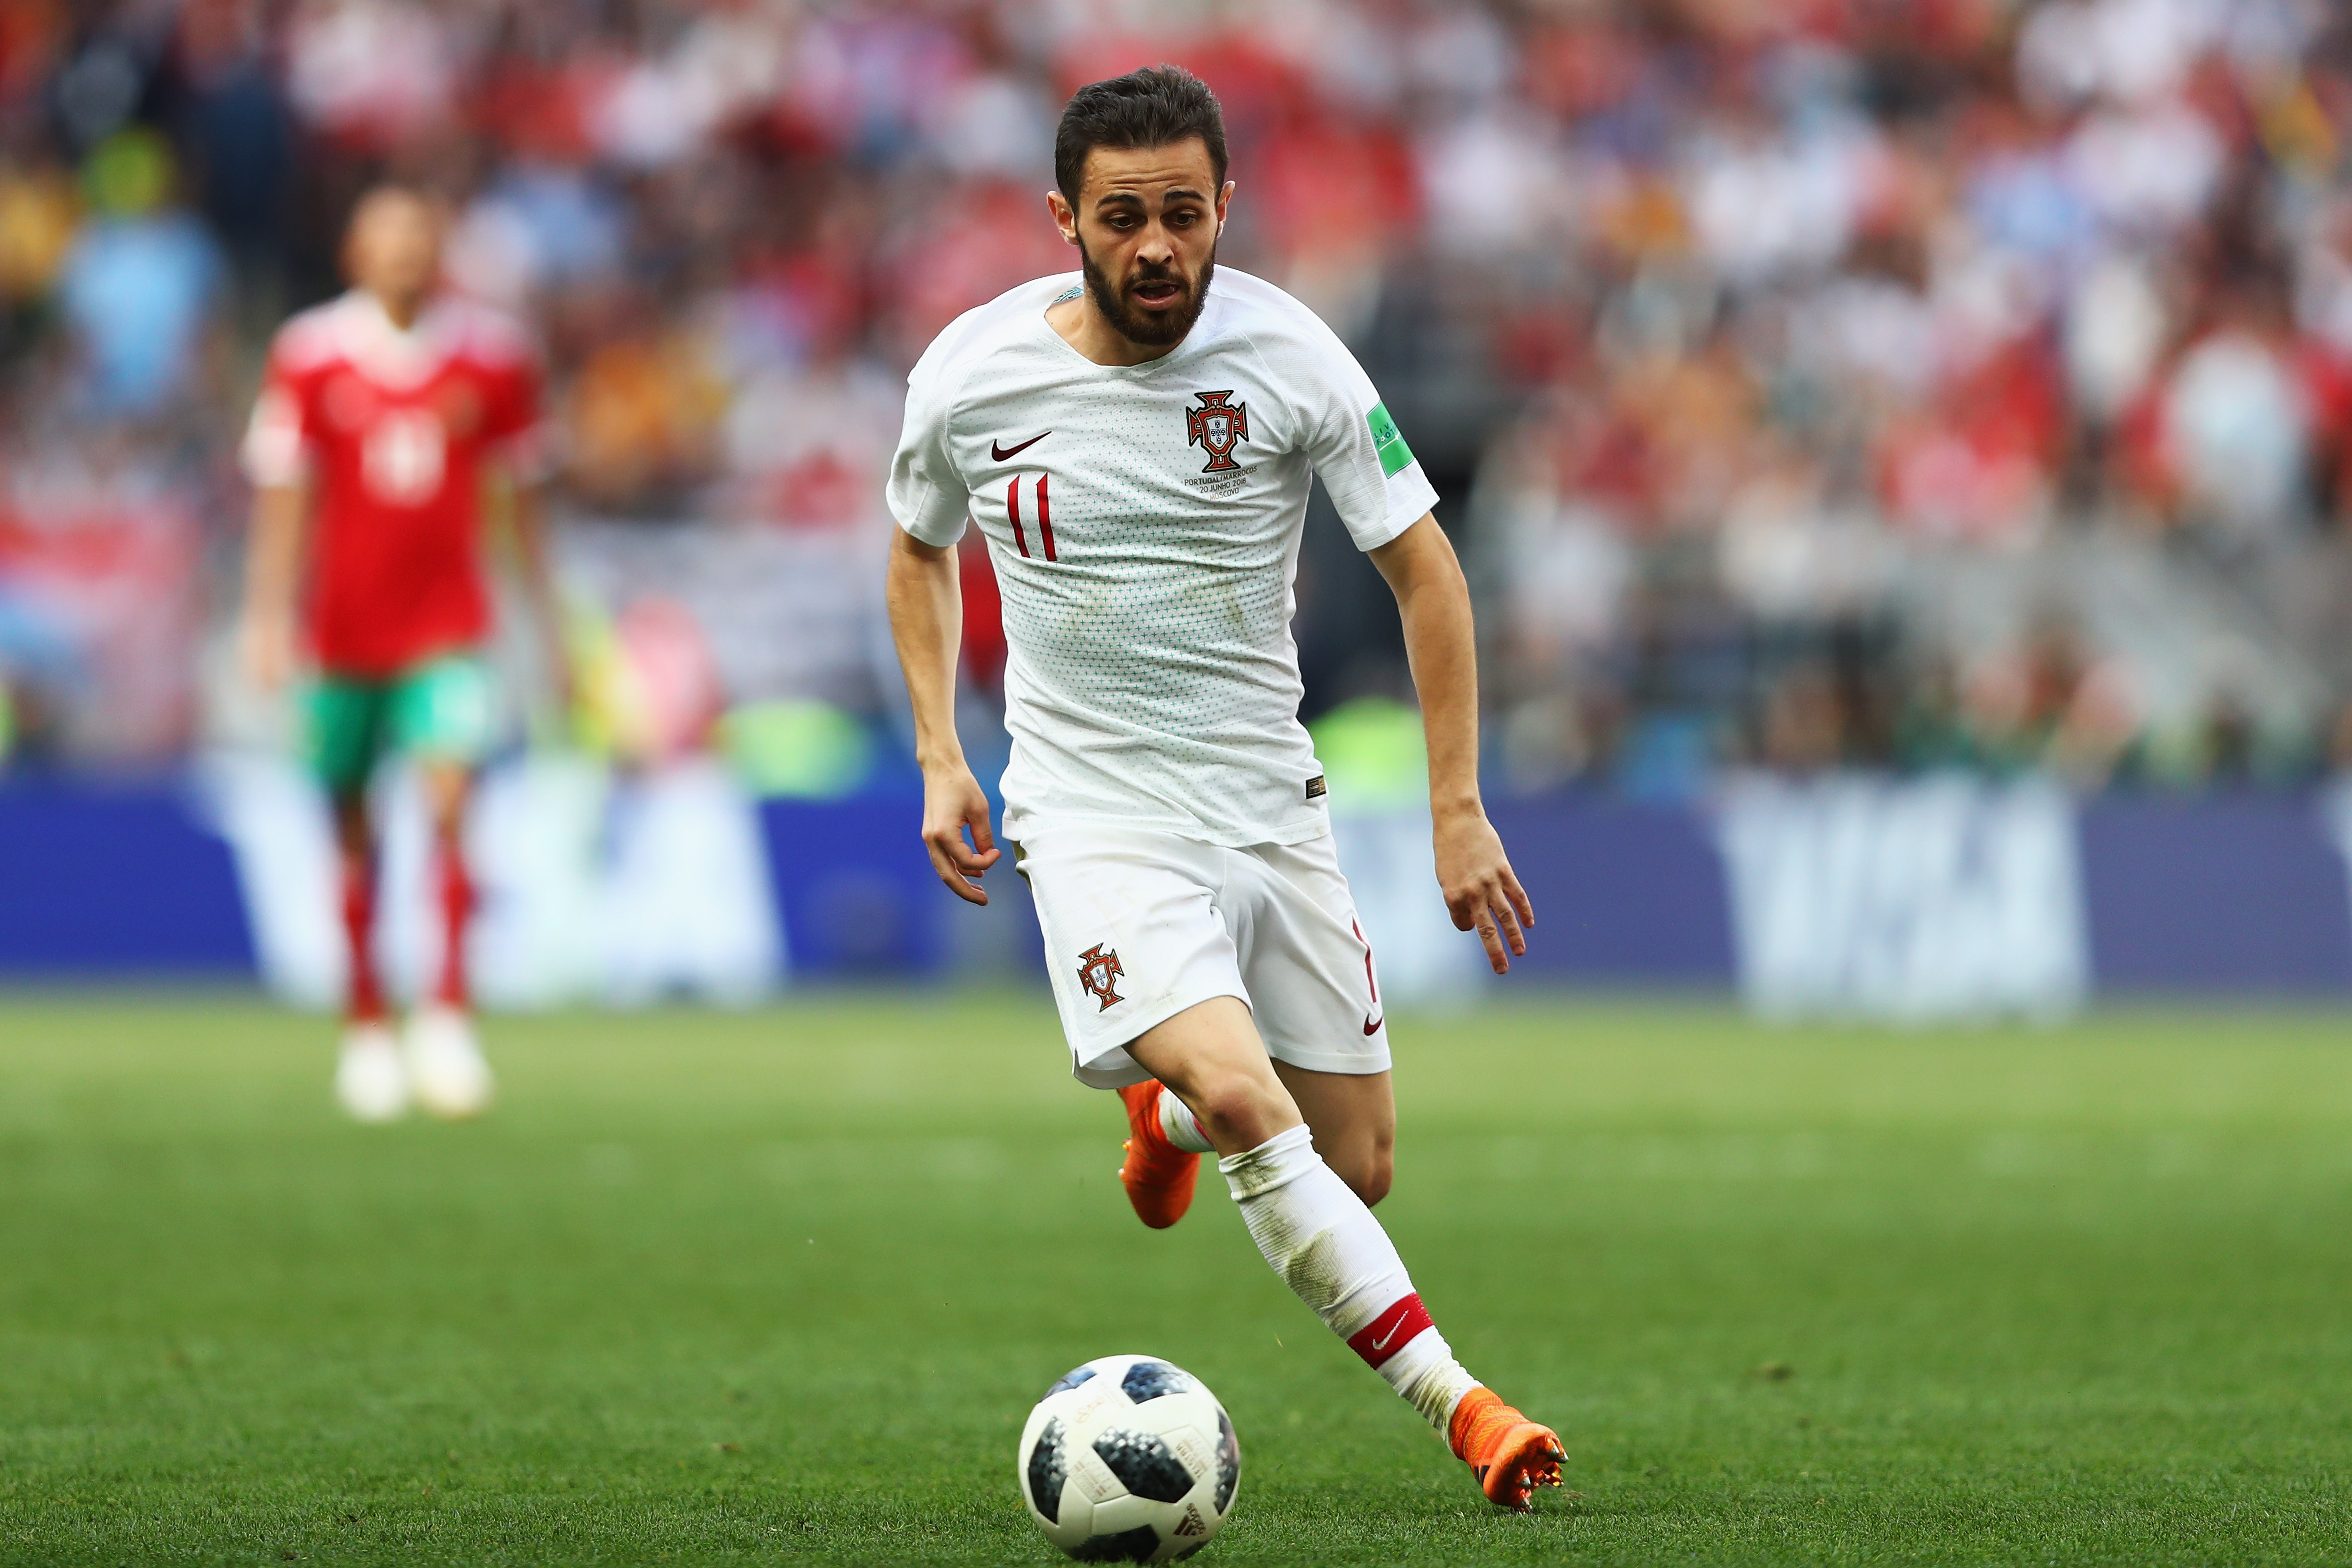 Bernardo Silva is on the path to becoming Portugal's most important players. (Photo courtesy: AFP/Getty)